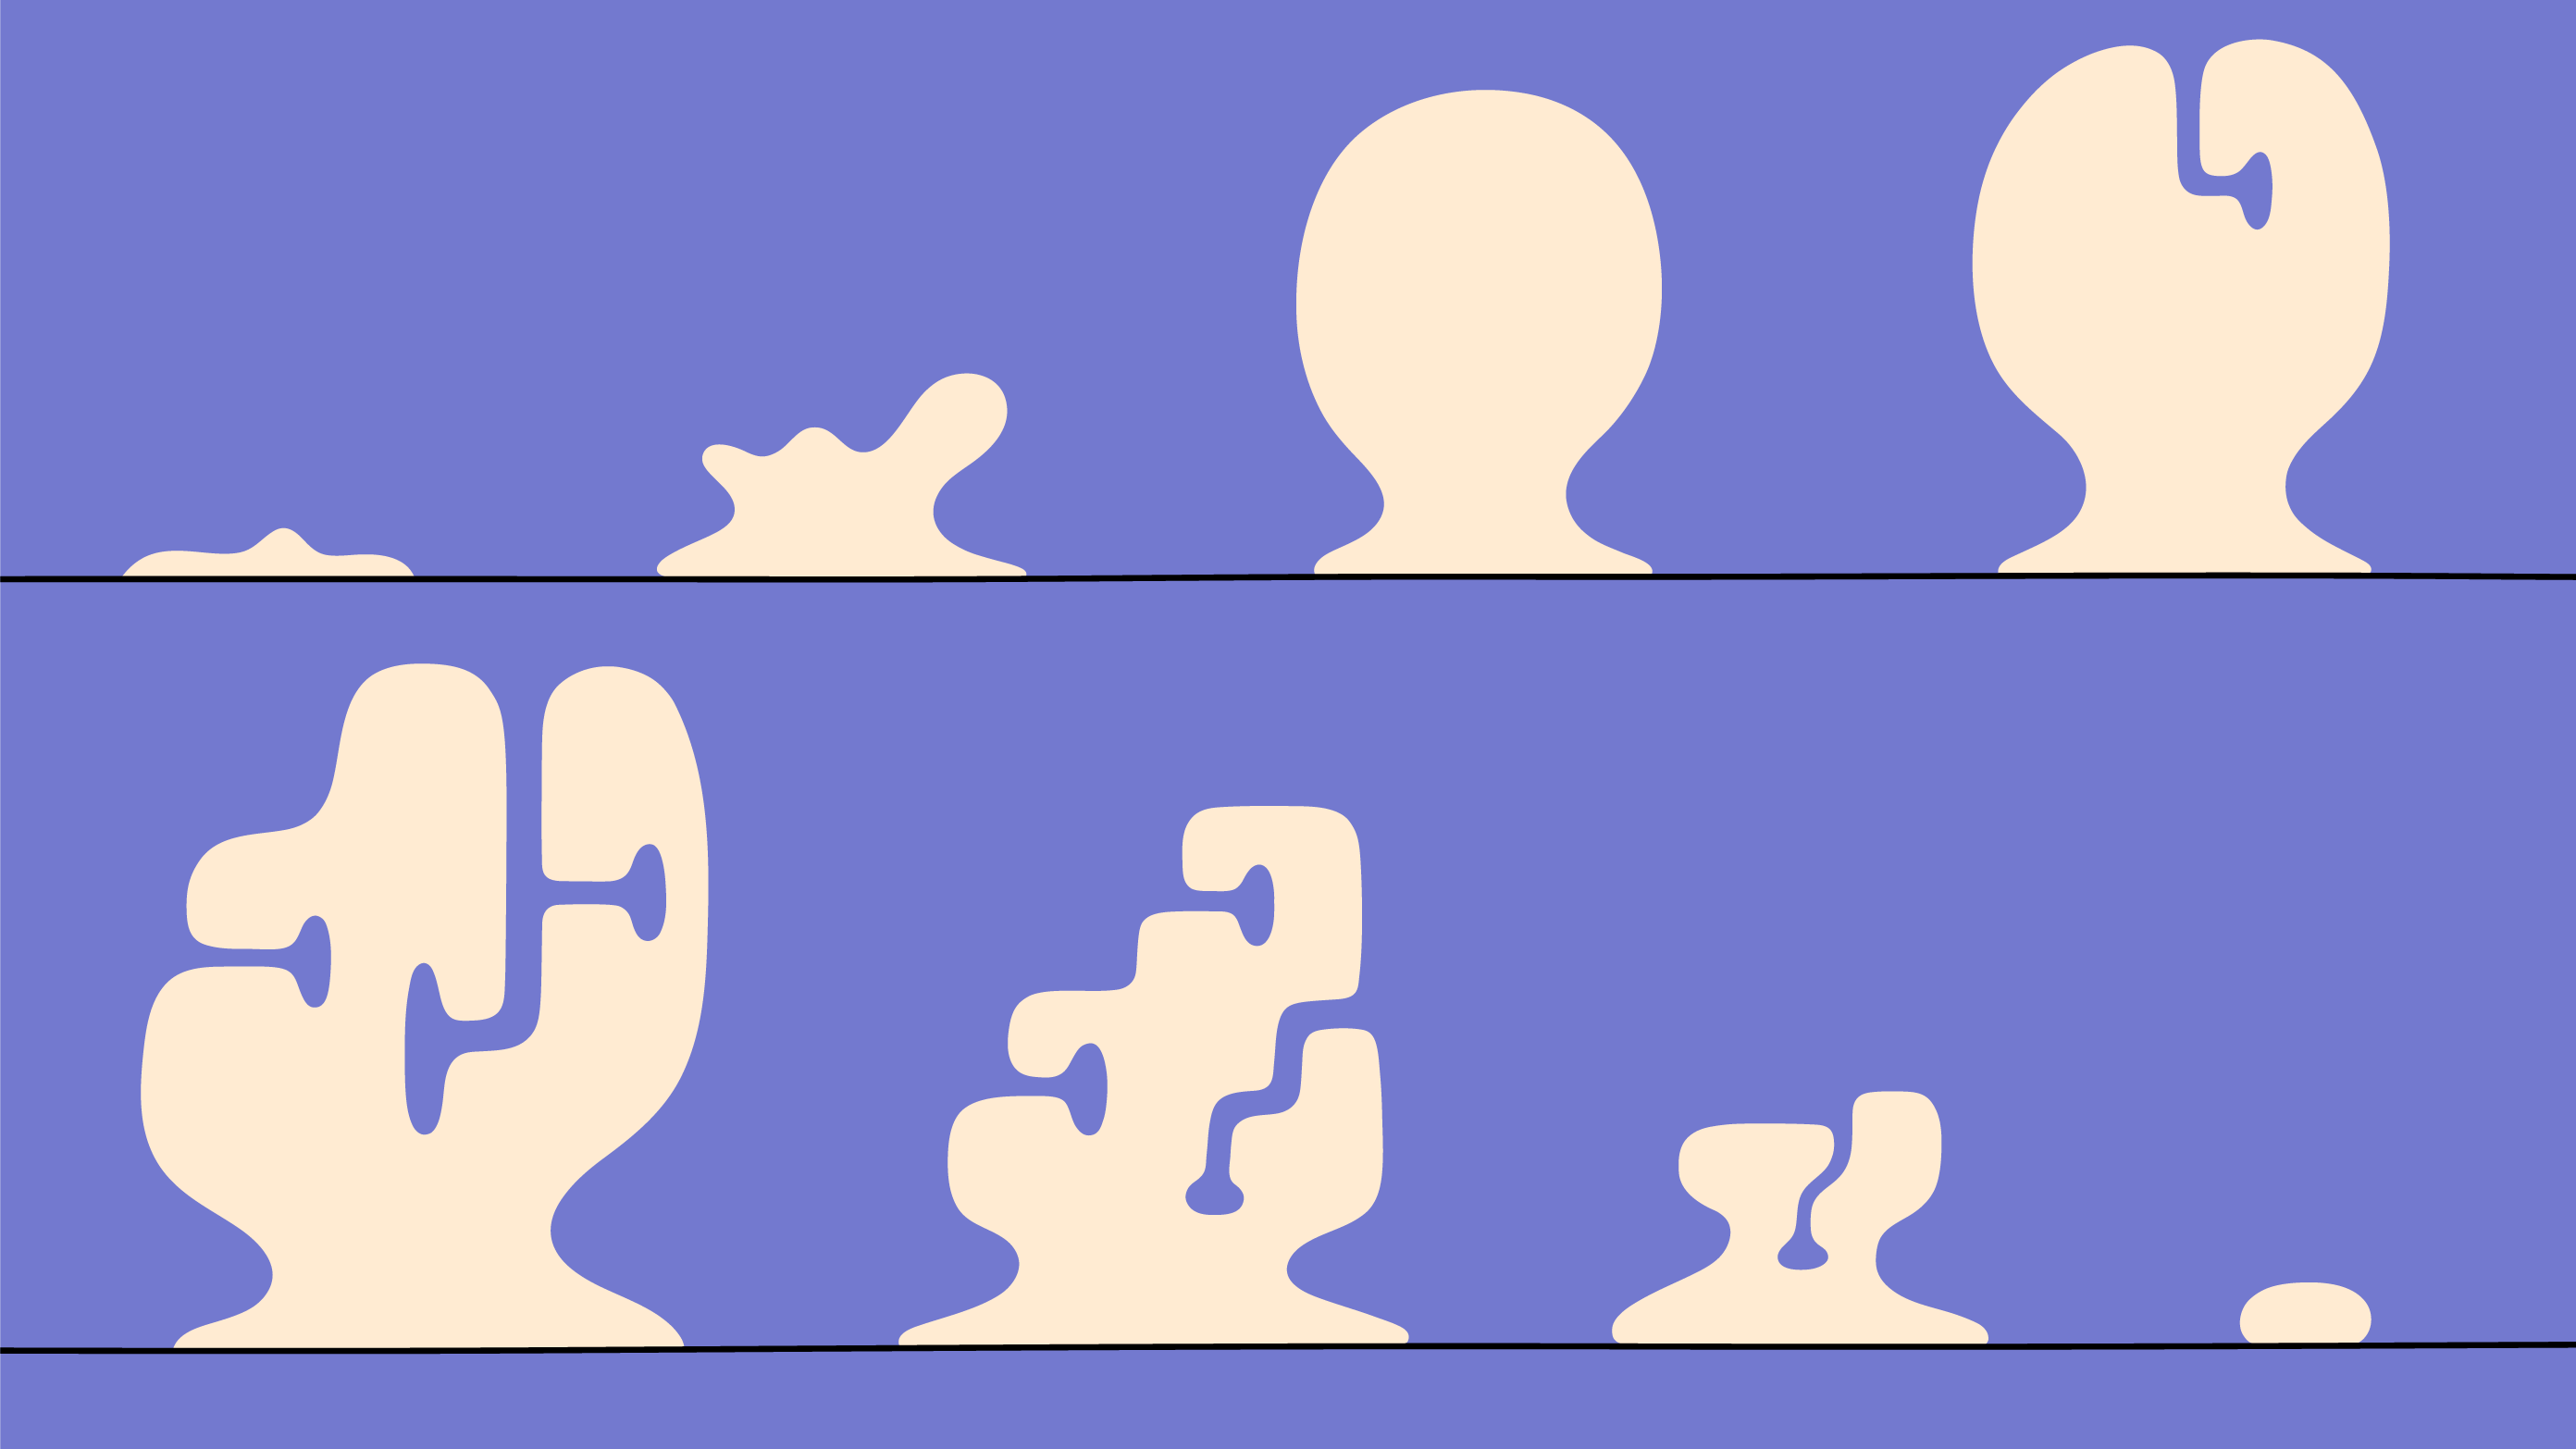 An abstract illustration featuring silhouetted shapes against a solid blue background. The top half shows three simplified, bald human head profiles with different irregular features—one has a wavy outline, another has a heart-shaped indentation, and the third has a split top. Below, there are various abstract shapes resembling melting forms or puddles with parts that interlock like puzzle pieces.